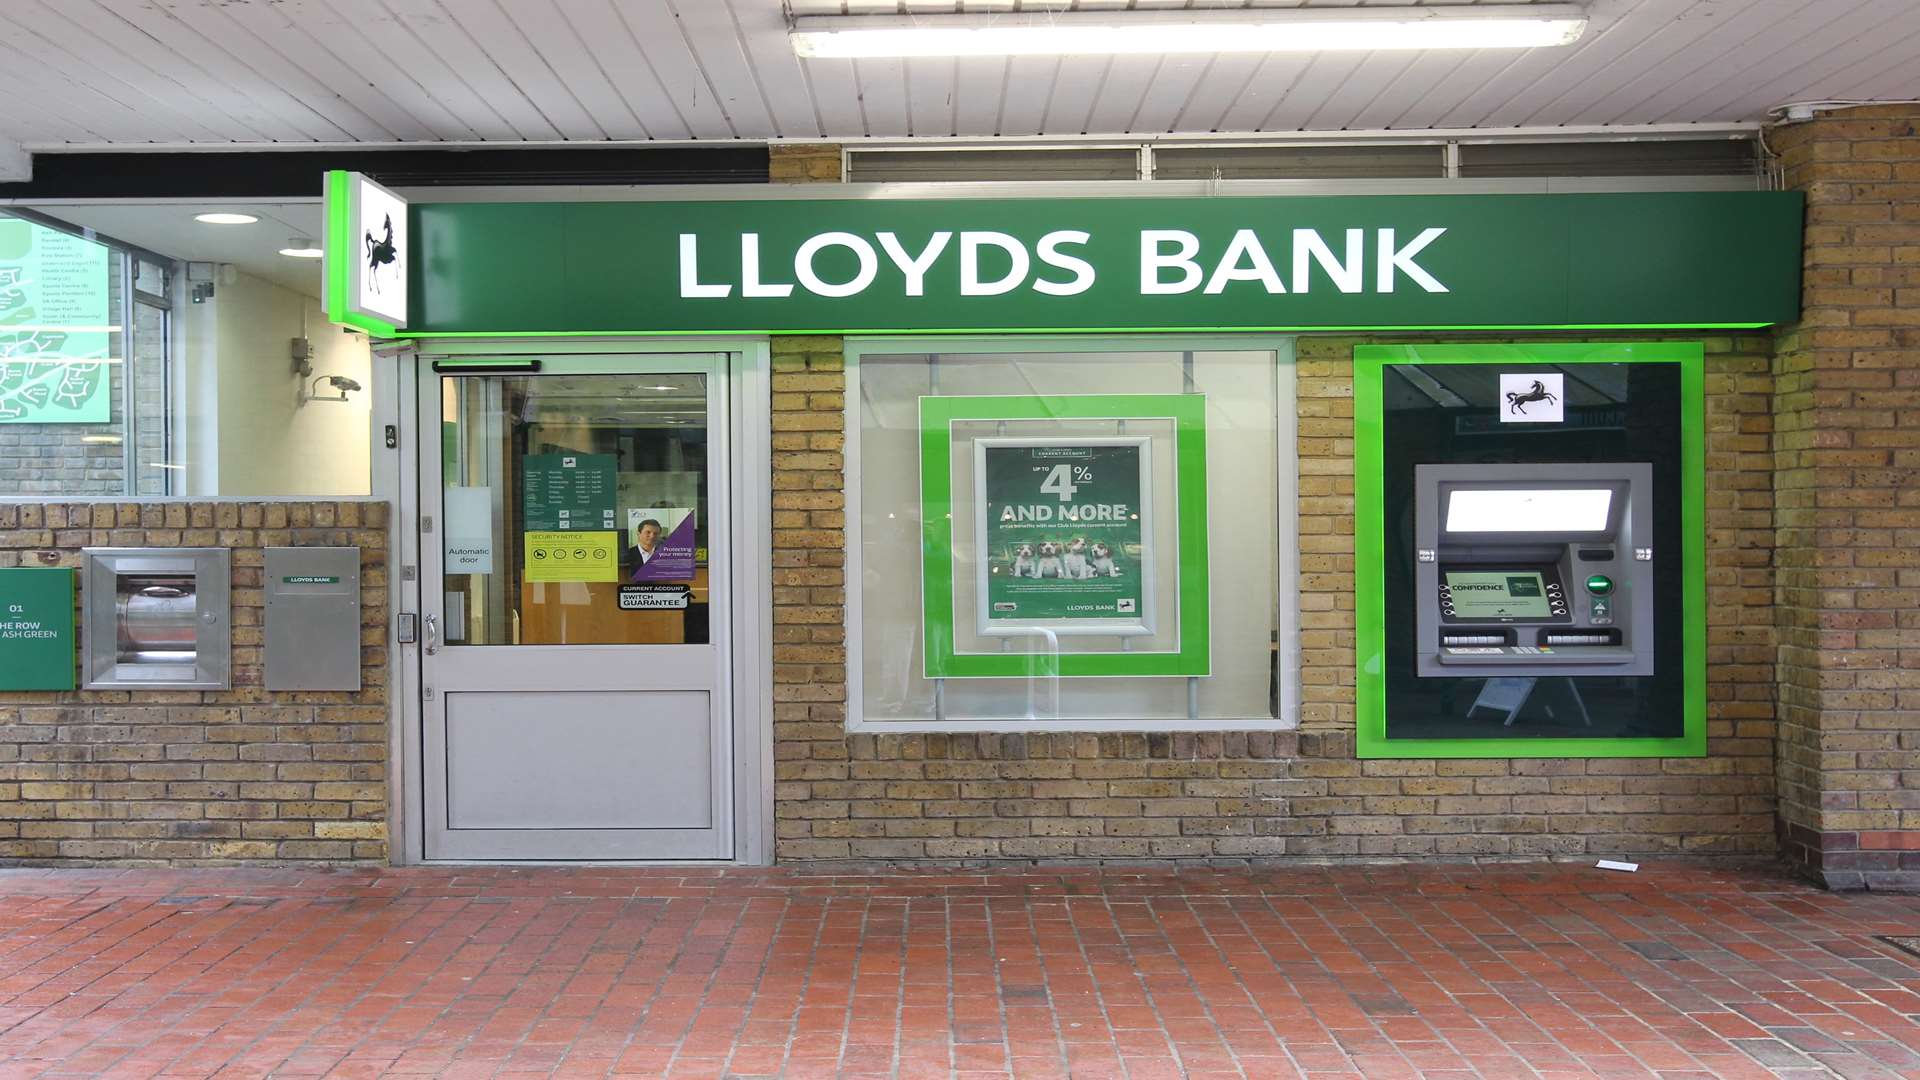 Small firms in Kent suffer as banks close branches across the county